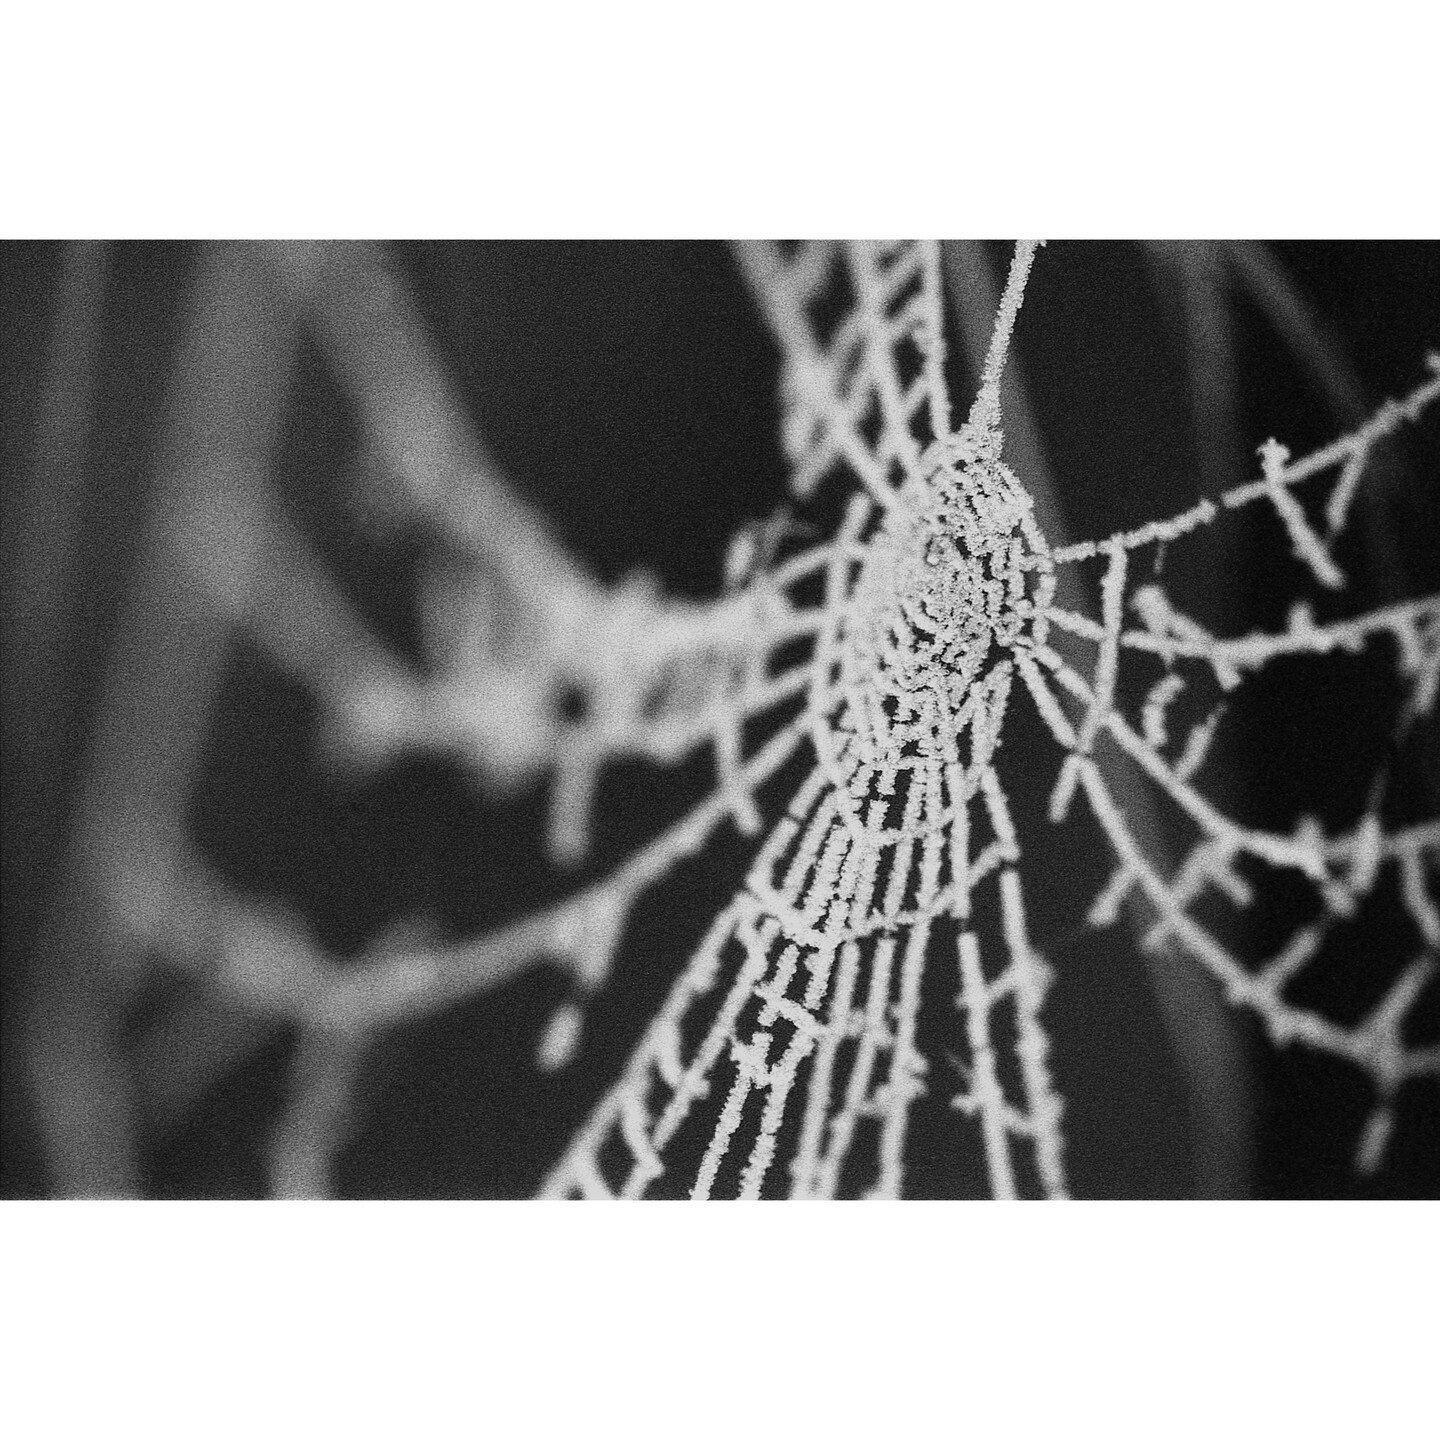 Frozen Web - Contax RTS ii - @zeisscameralenses 100mm Makro f2.8, @ilfordphoto Delta 3200 shot at 6400, developed at @campkinscameras post in @affinitybyserif